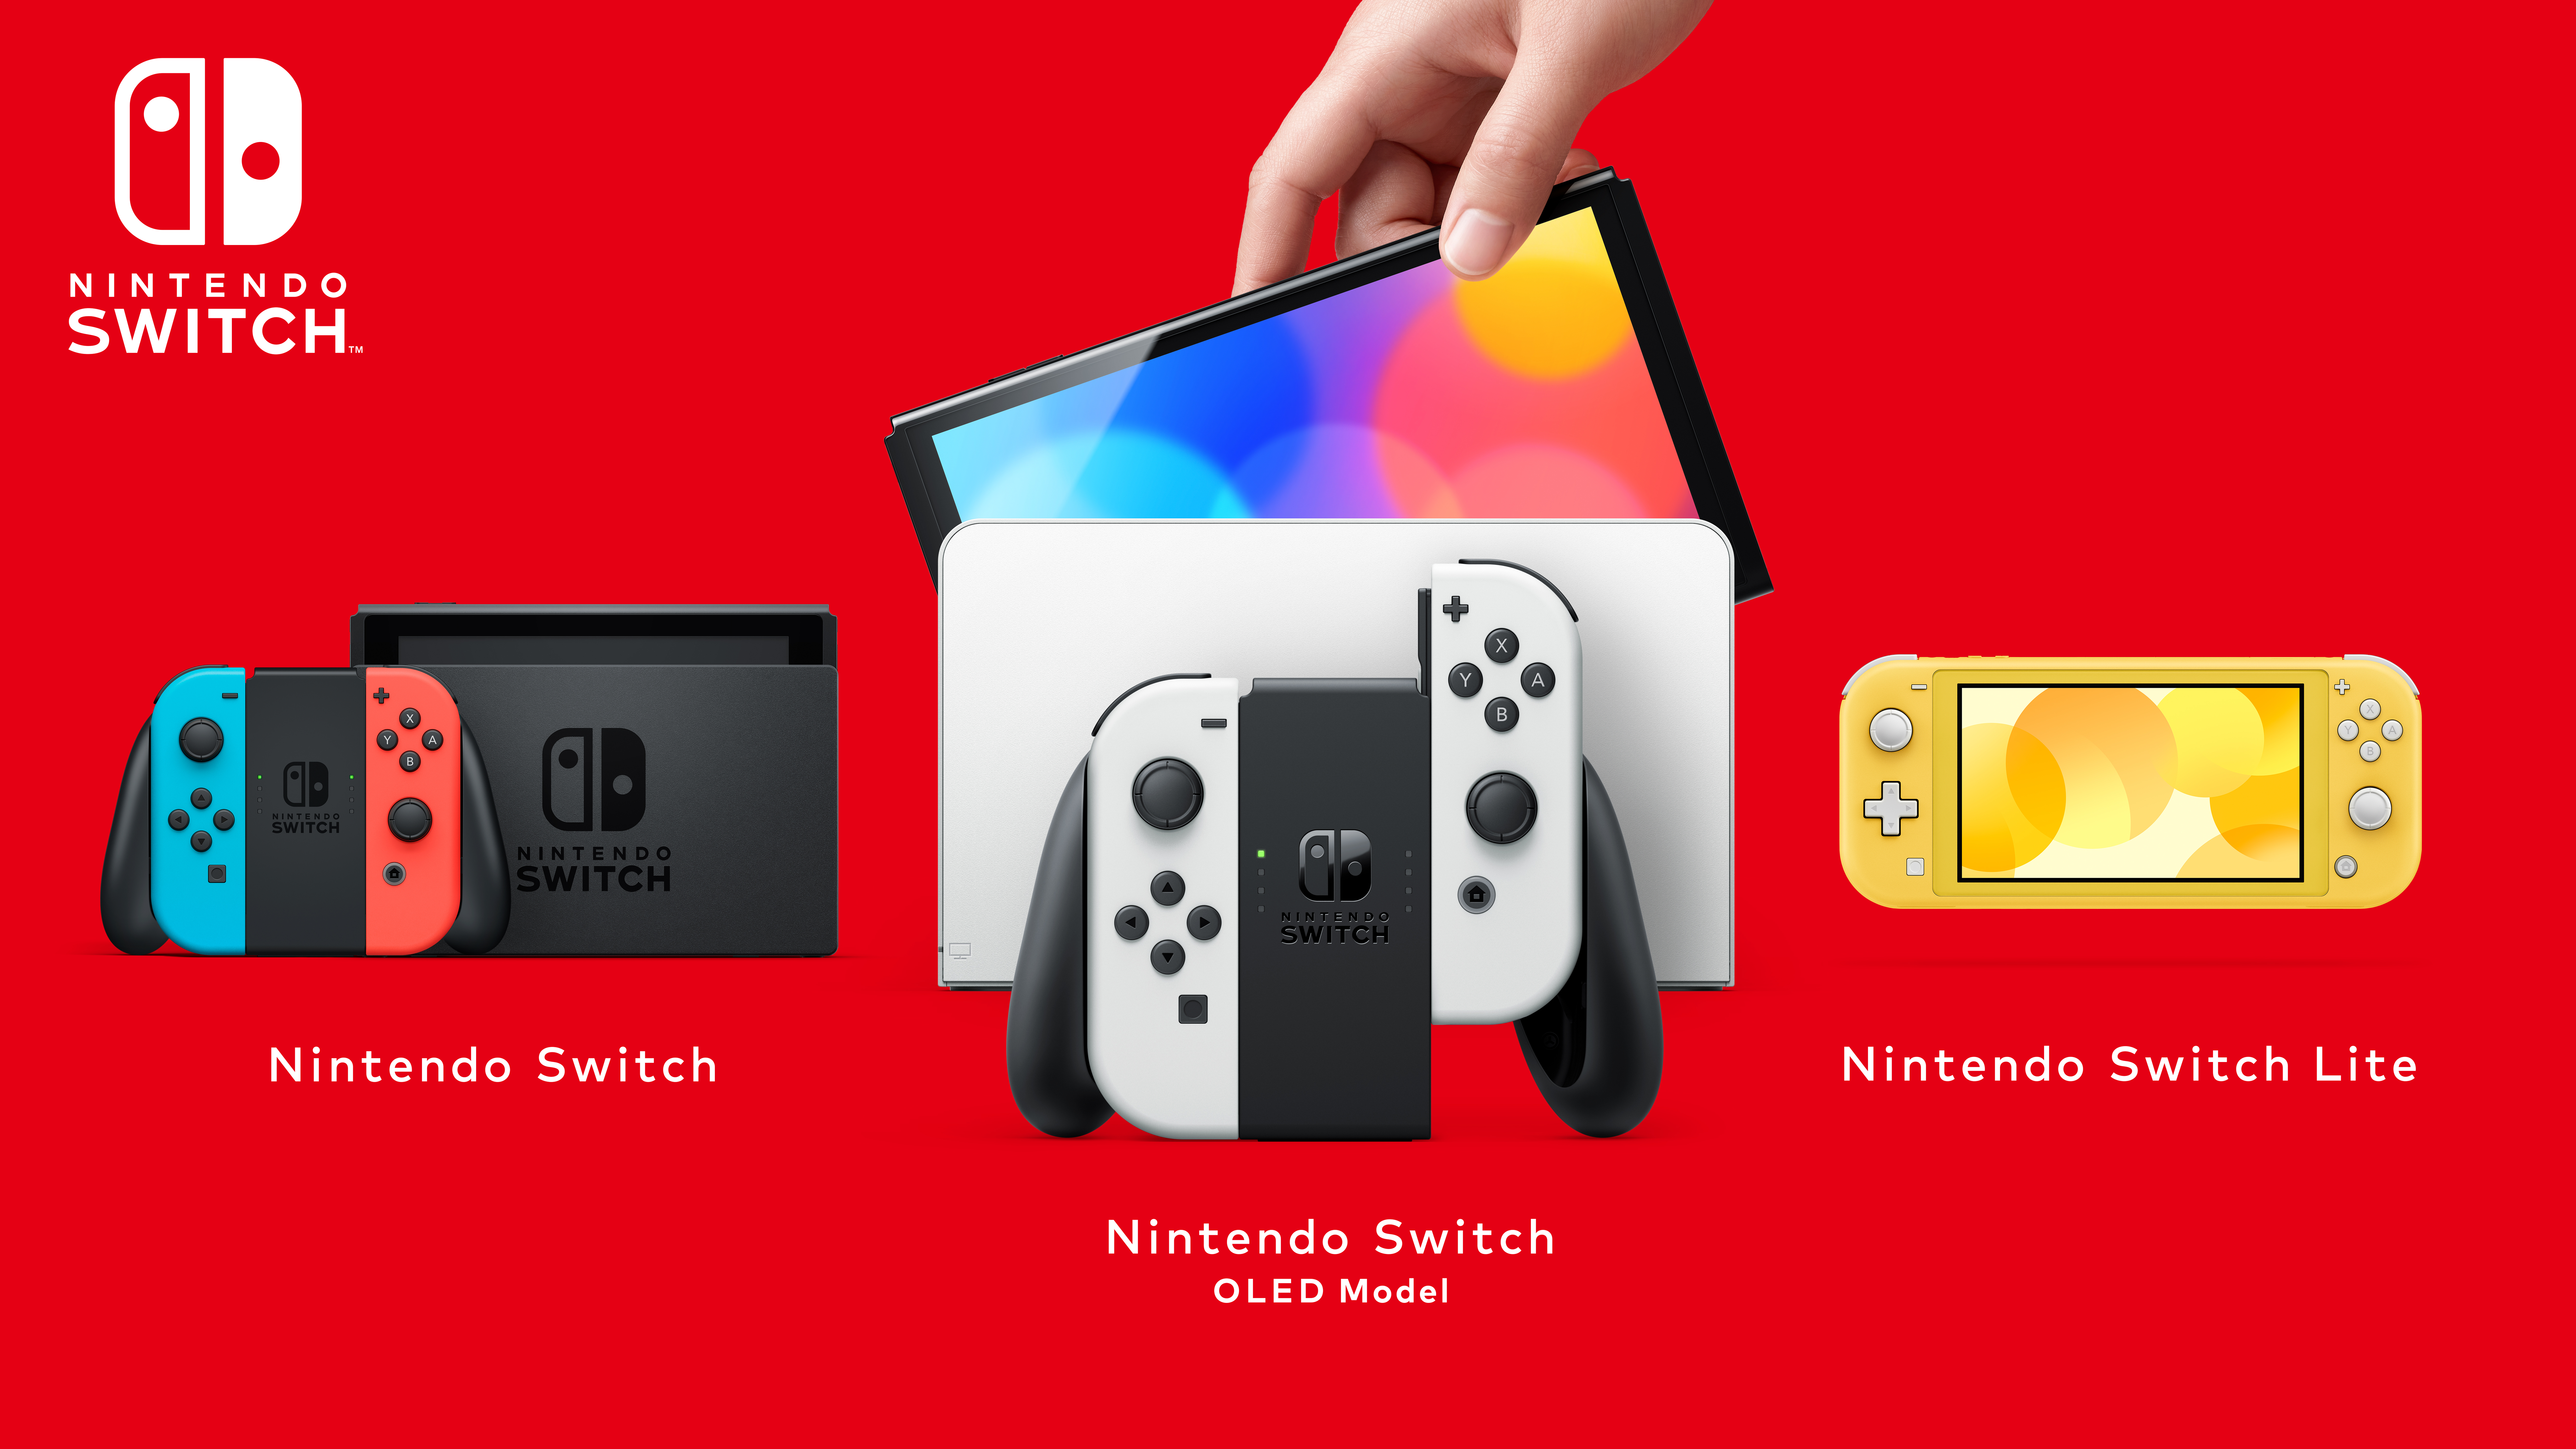 Nintendo Switch Price and Release Date Confirmed - GameSpot